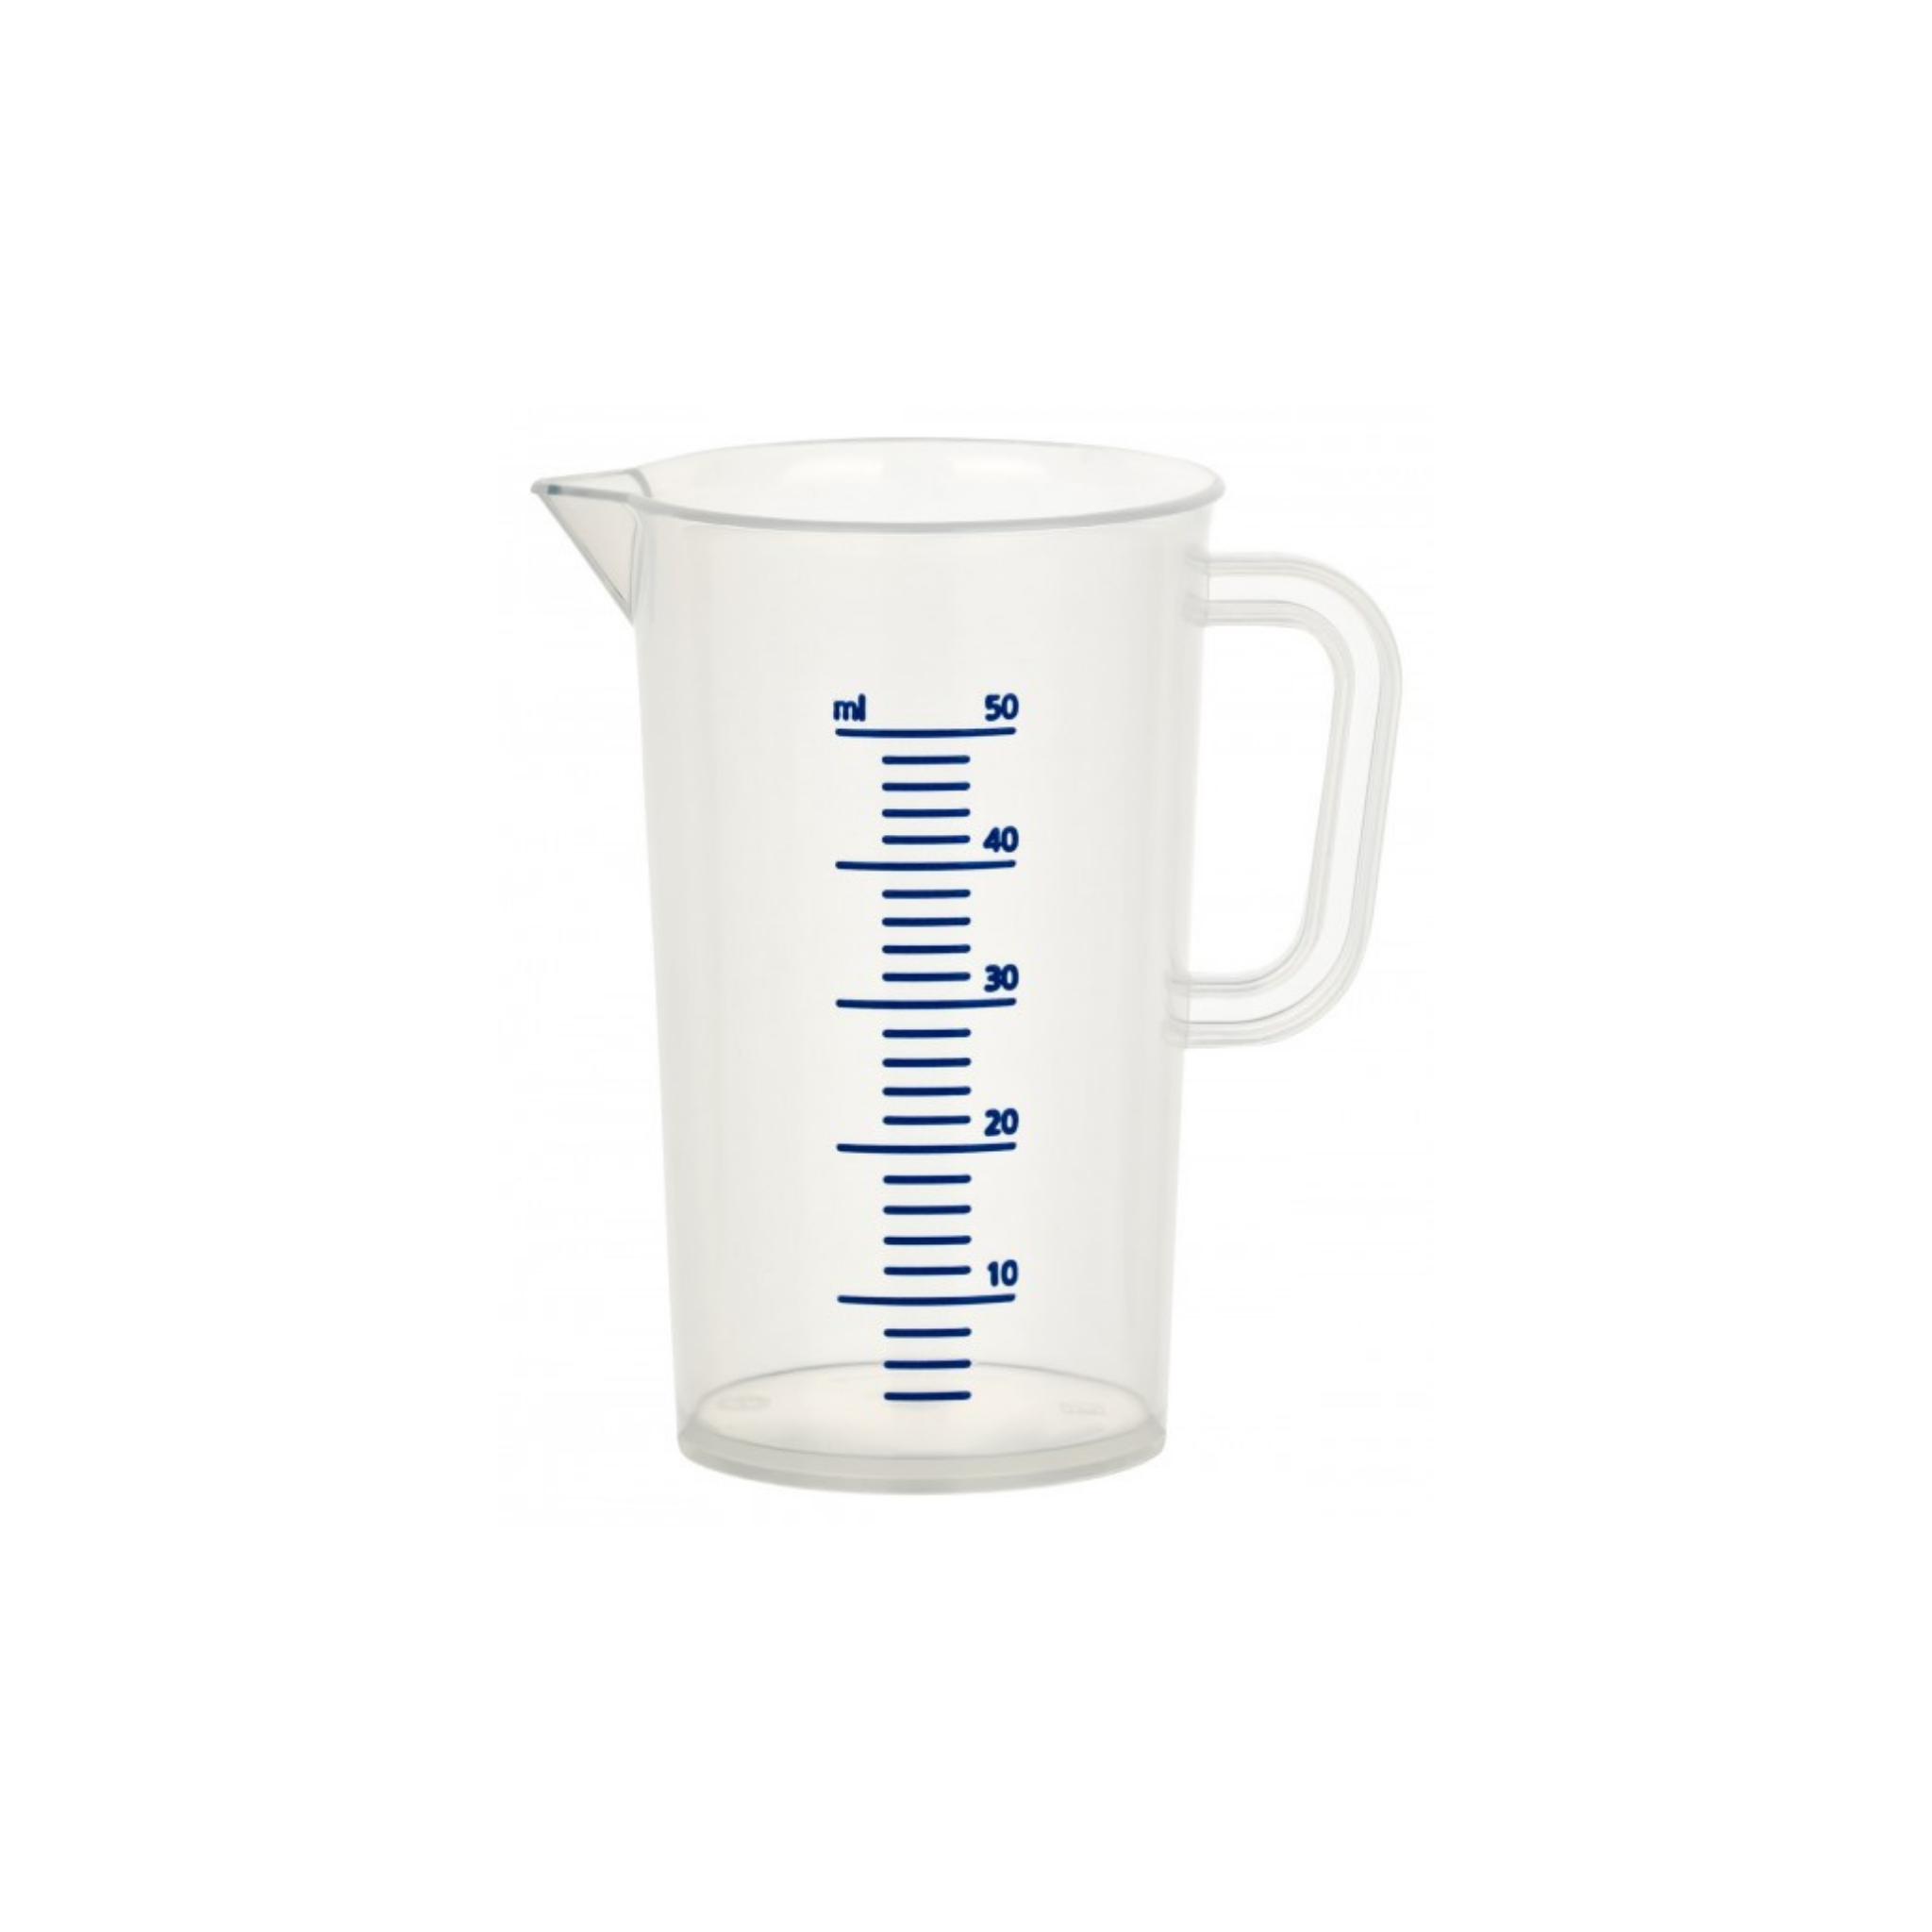 Measuring cup 50ml